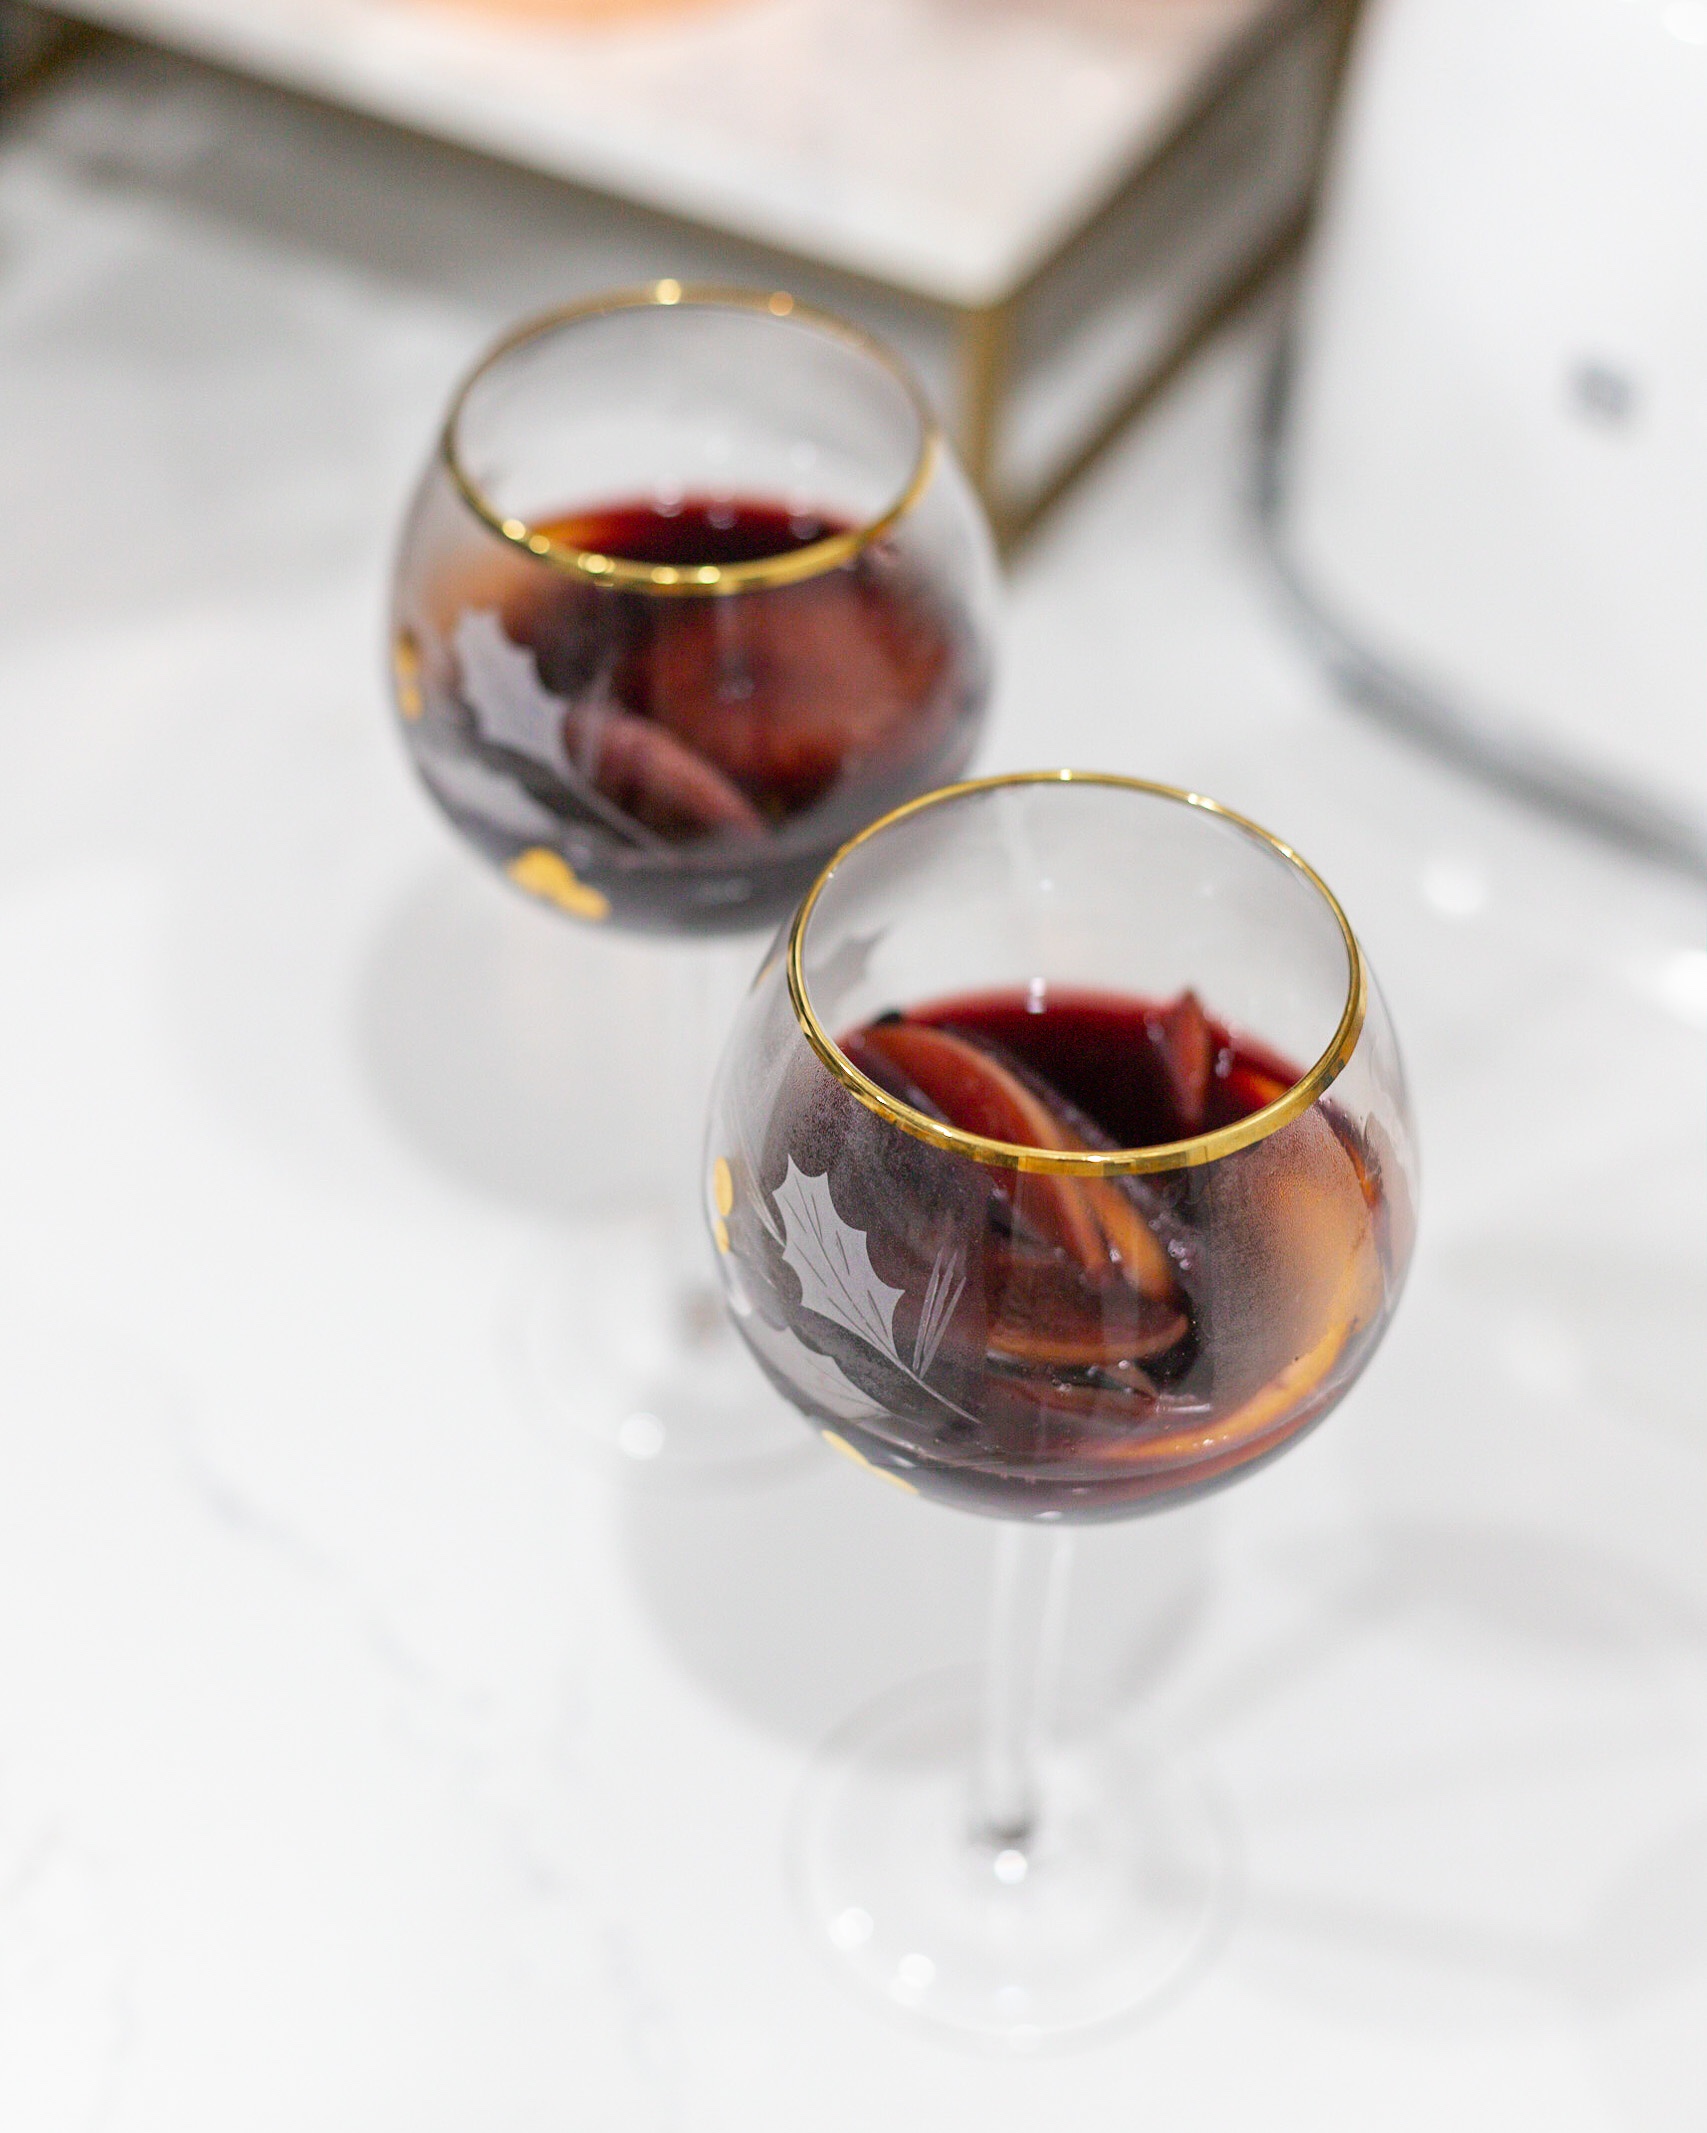 INSTANT POT HOLIDAY MULLED WINE